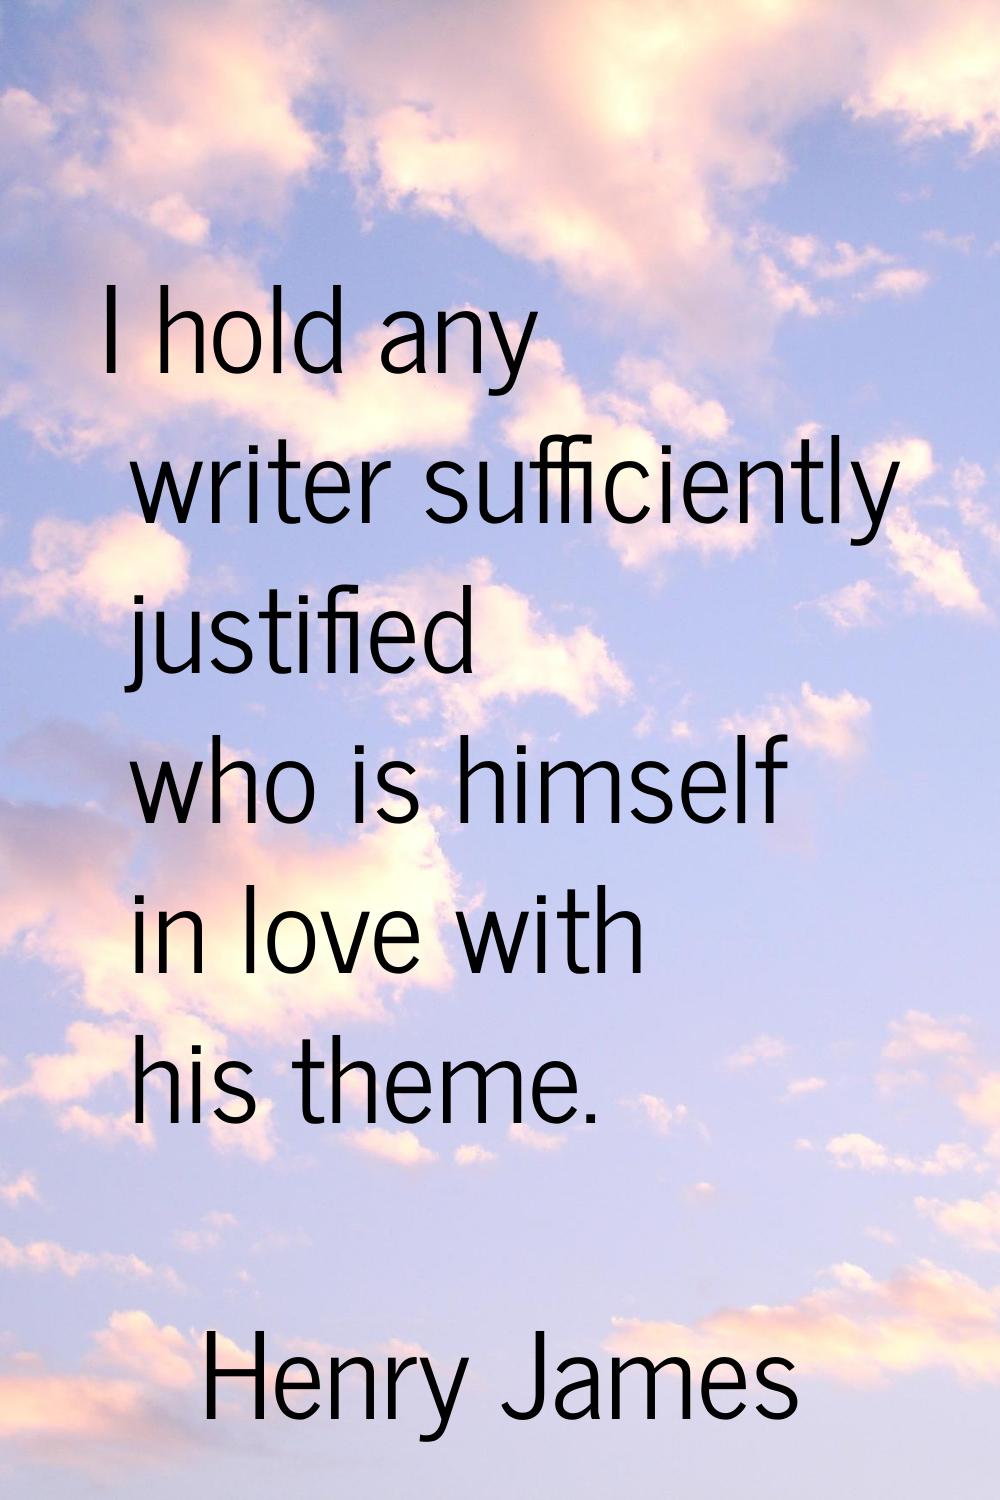 I hold any writer sufficiently justified who is himself in love with his theme.